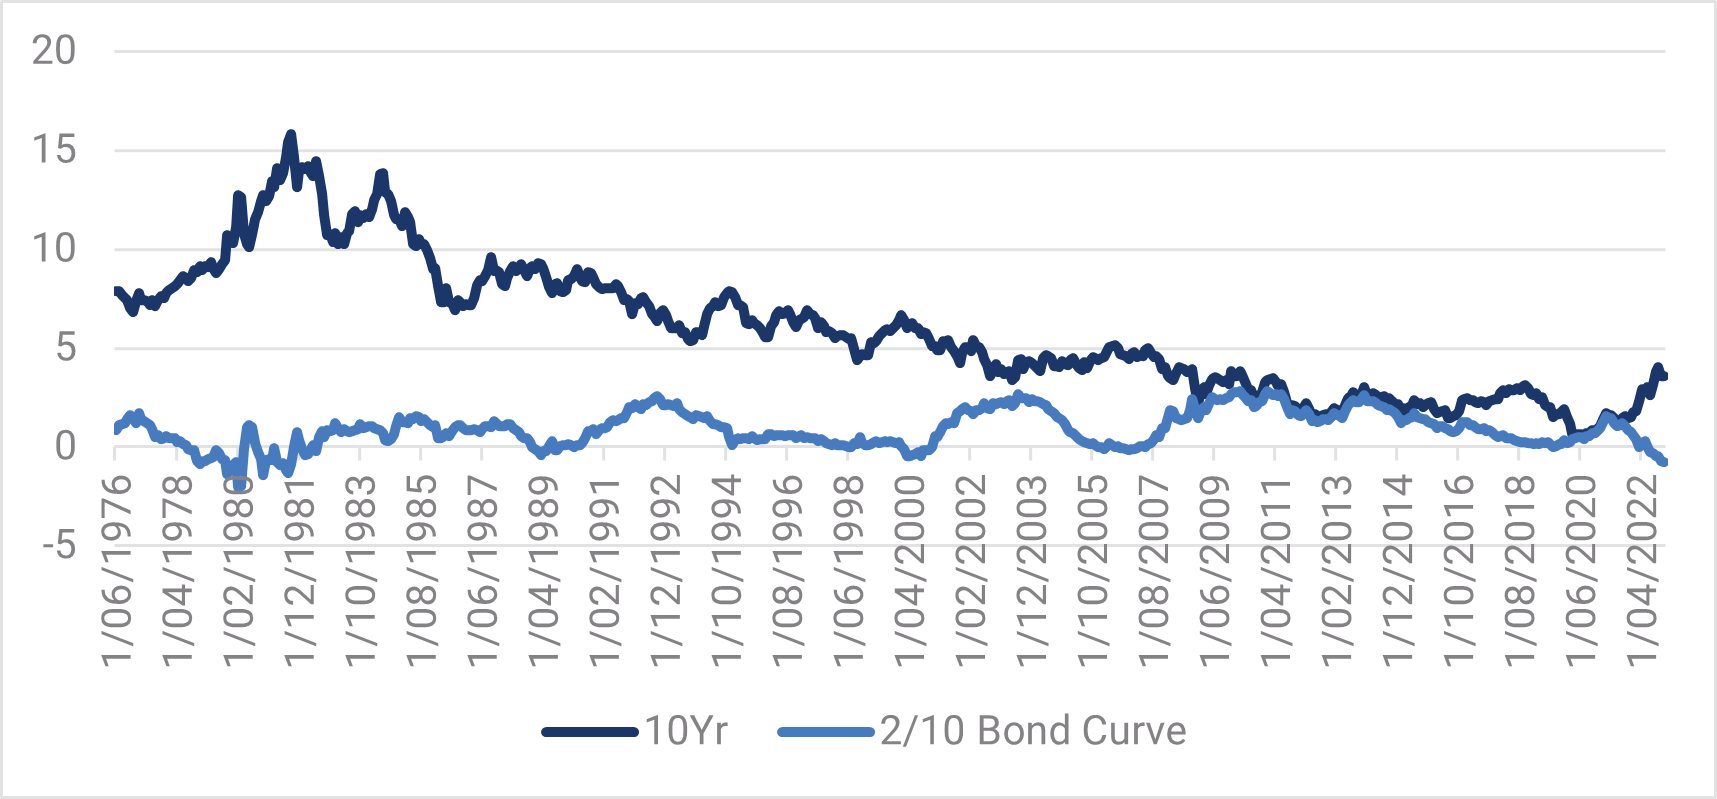 
Chart 14 – Outright Bond Yields and the 2/10 Curve

Source: YarraCM, Bloomberg